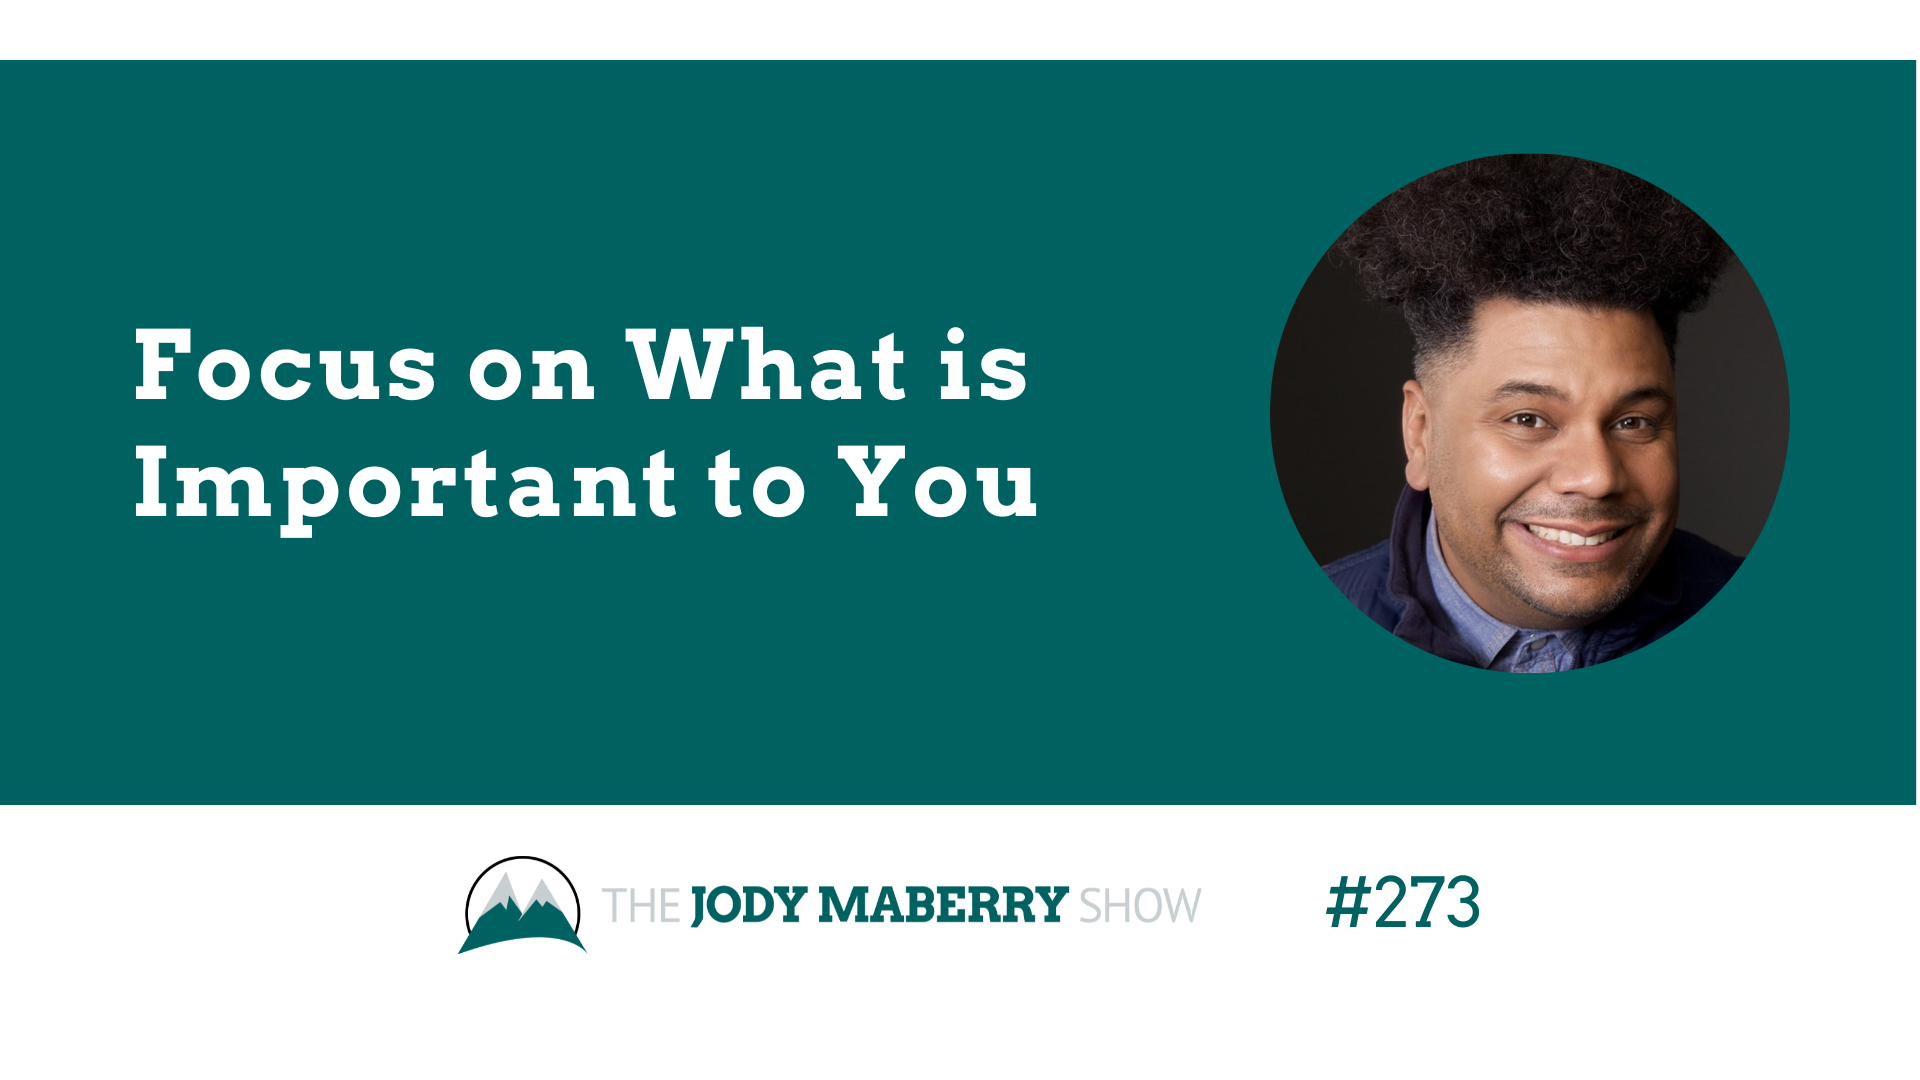 Jody Maberry Show Focus on What is Important to You Episode 273 Orlando Leyba